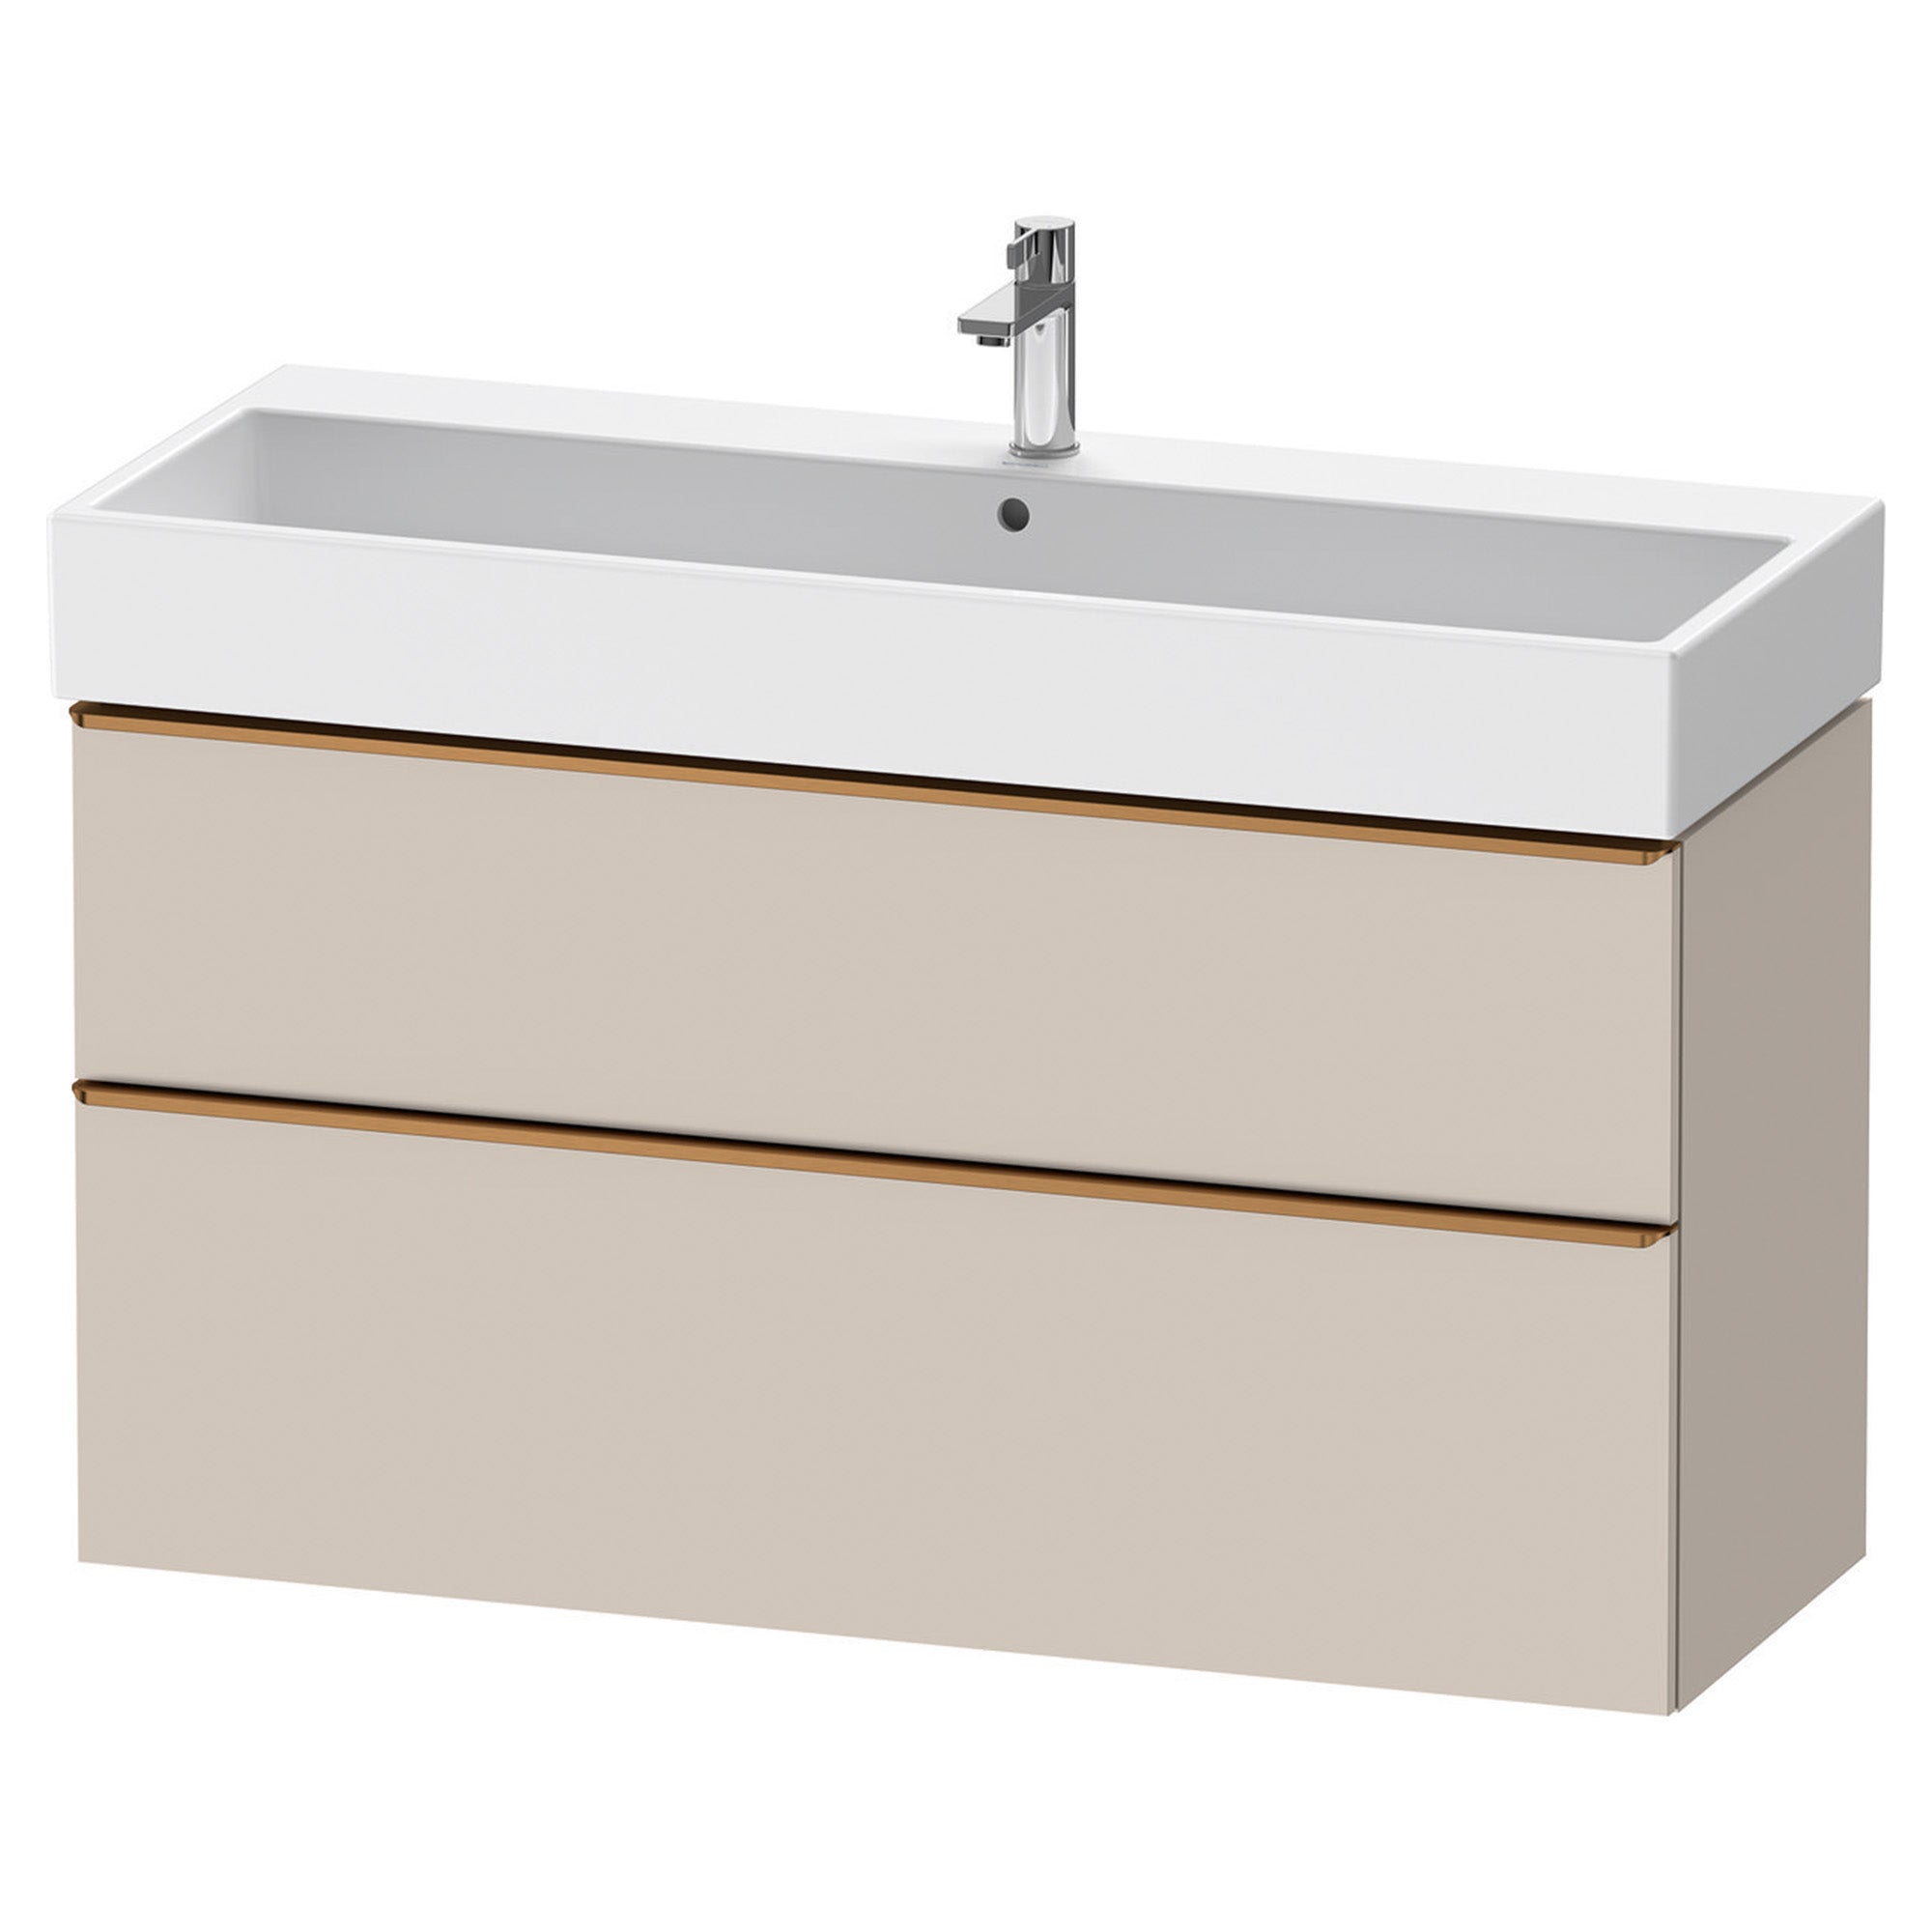 duravit d-neo 1200 wall mounted vanity unit with vero basin taupe brushed bronze handles